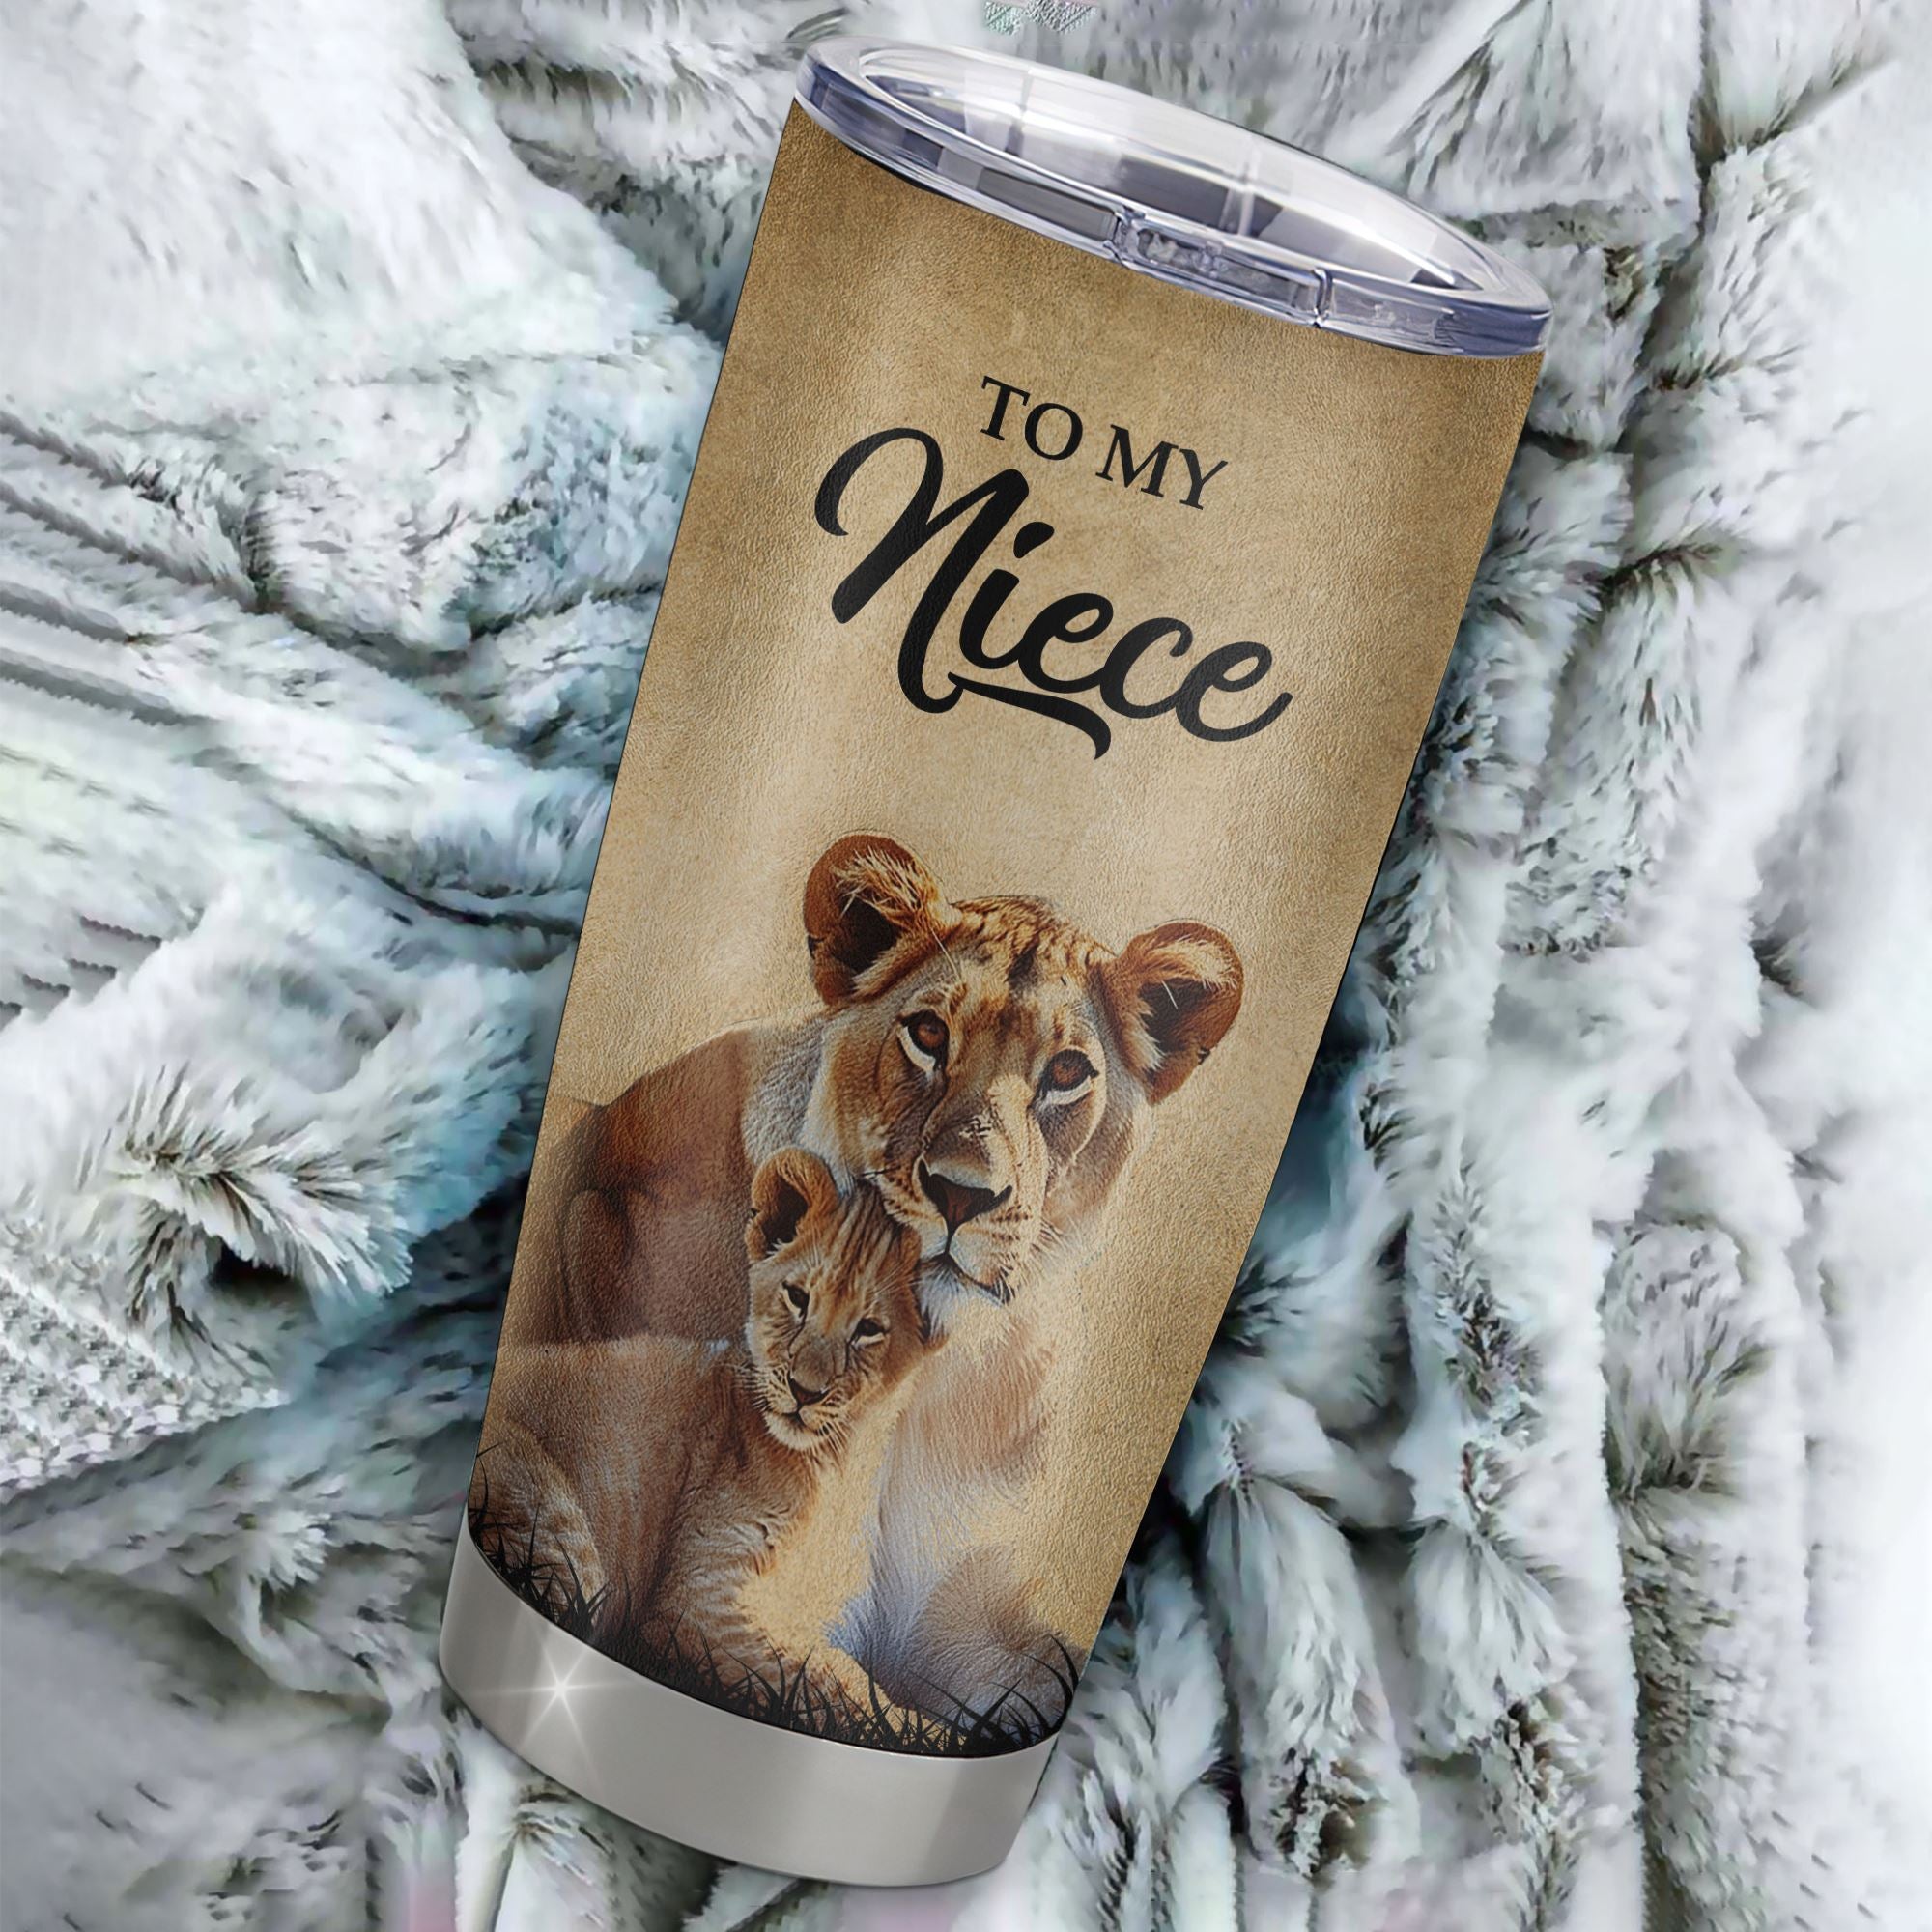 Personalized_To_My_Niece_Lion_Tumbler_From_Aunt_Auntie_Stainless_Steel_Cup_I_ll_Stay_There_Forever_Niece_Birthday_Graduation_Christmas_Travel_Mug_Tumbler_mockup_1.jpg